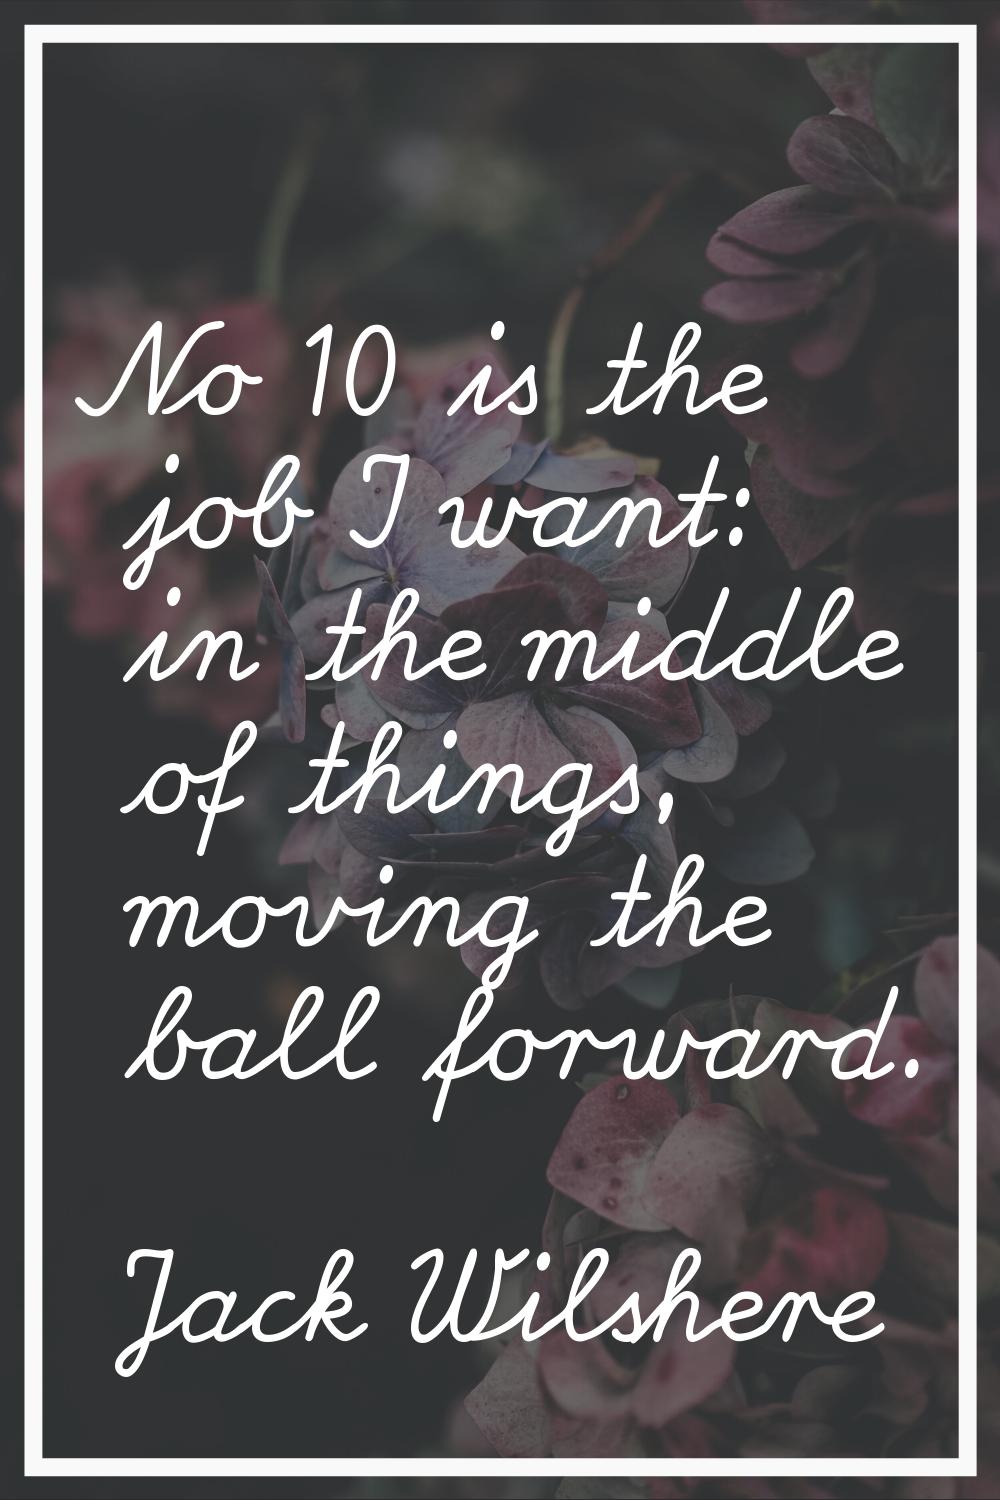 No 10 is the job I want: in the middle of things, moving the ball forward.